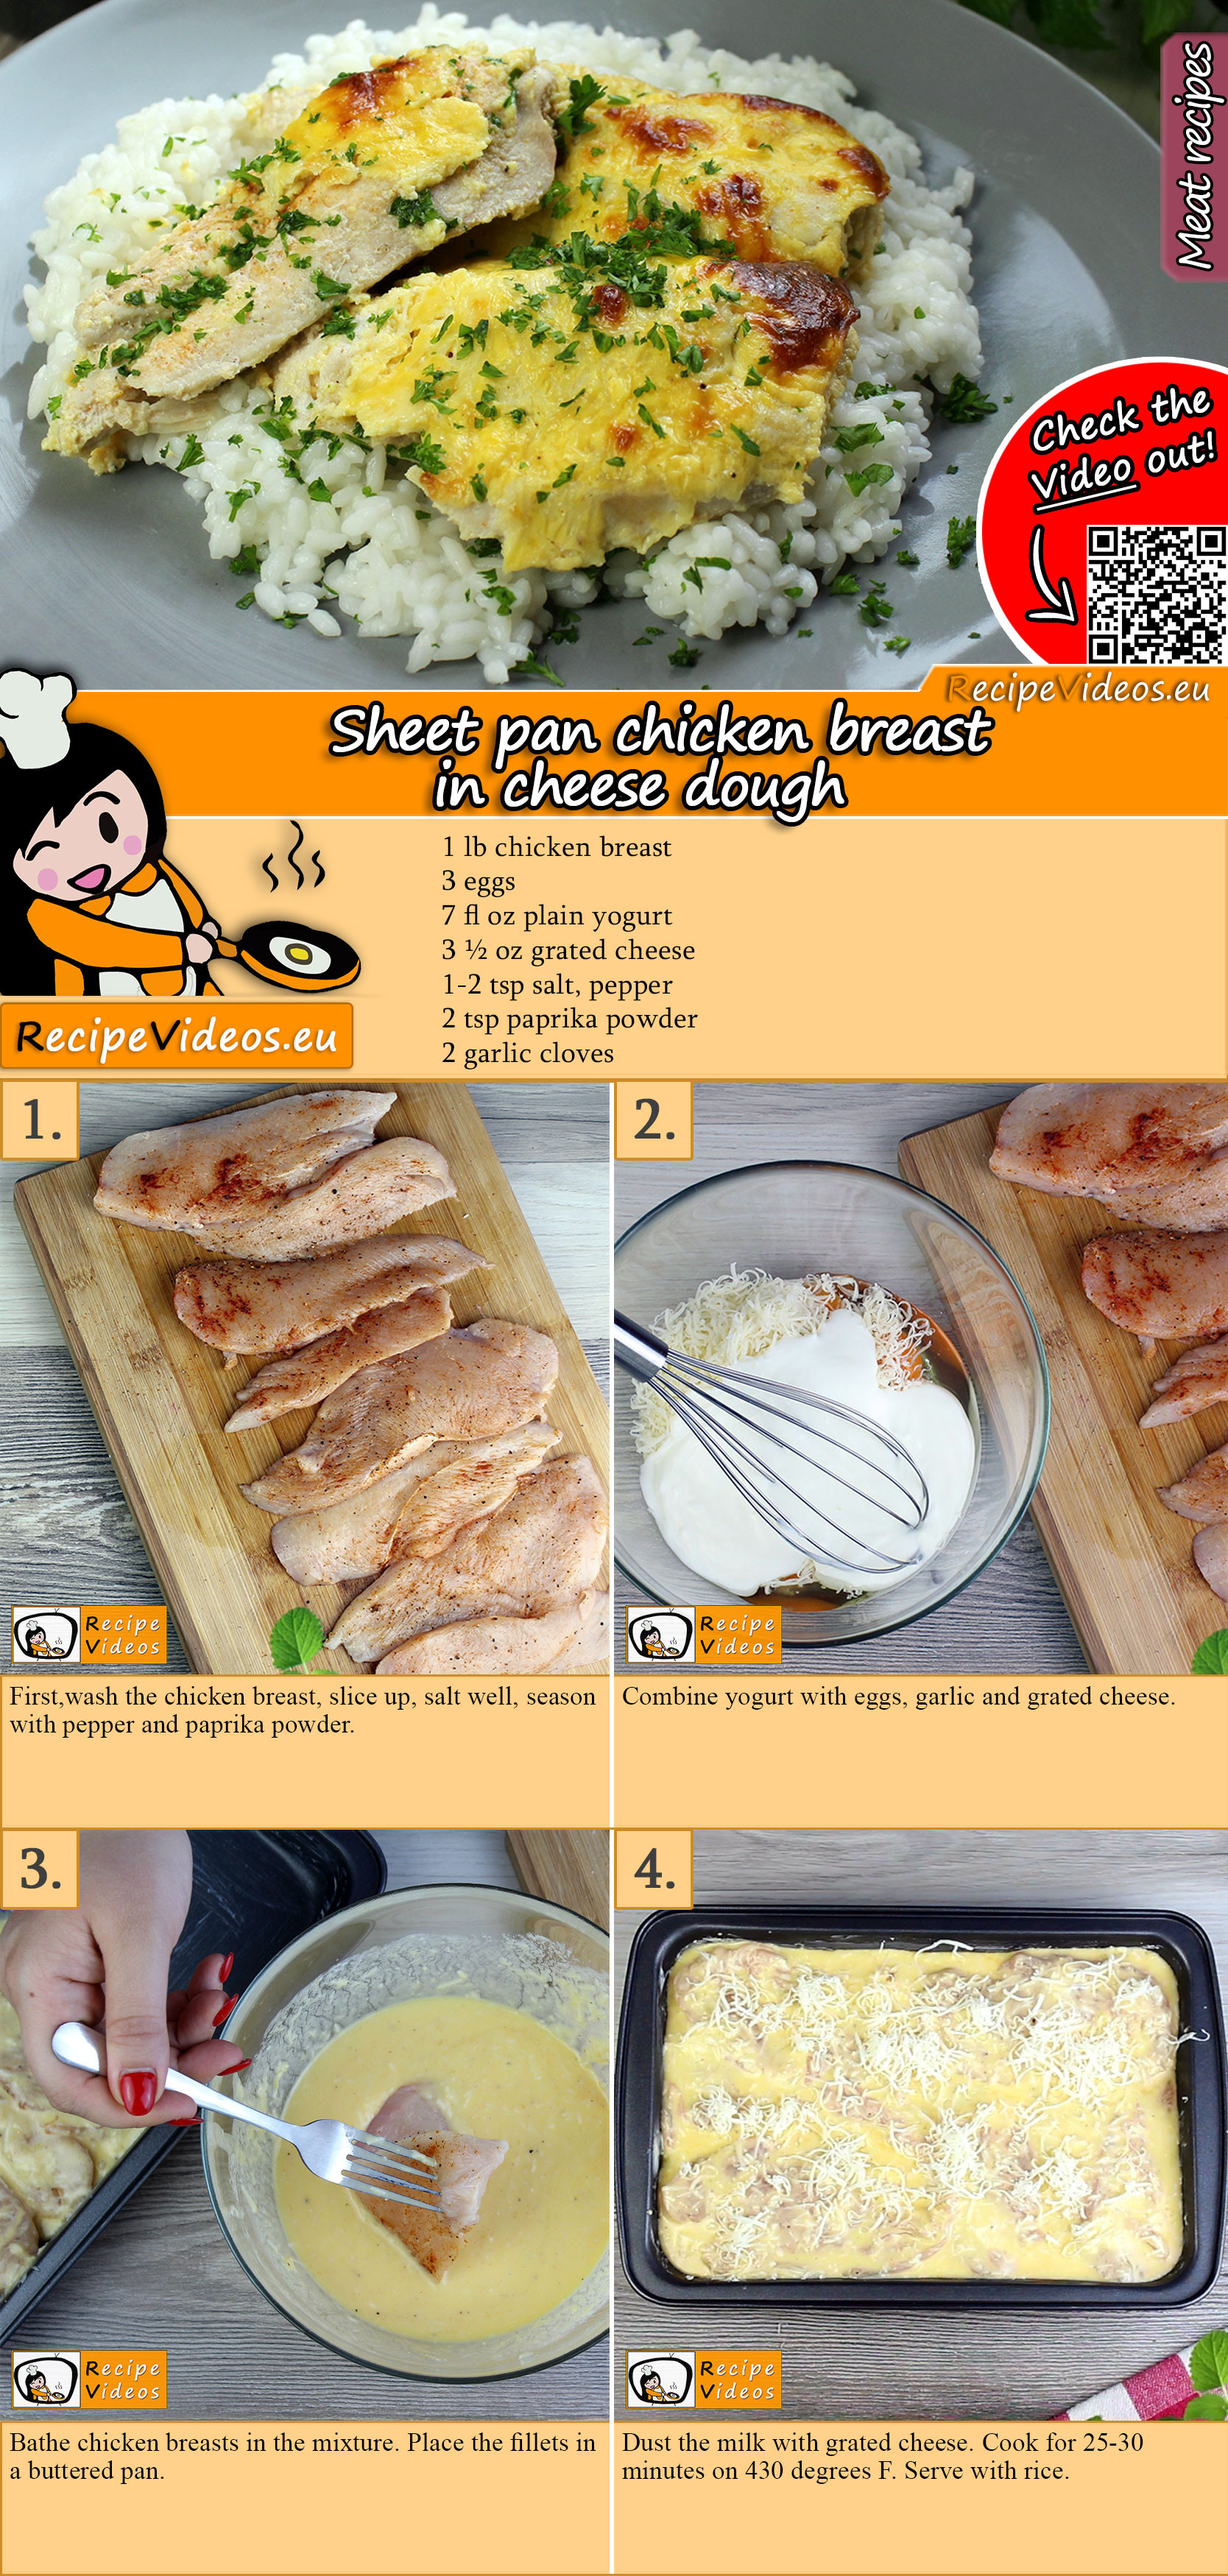 Sheet pan chicken breast in cheese dough recipe with video